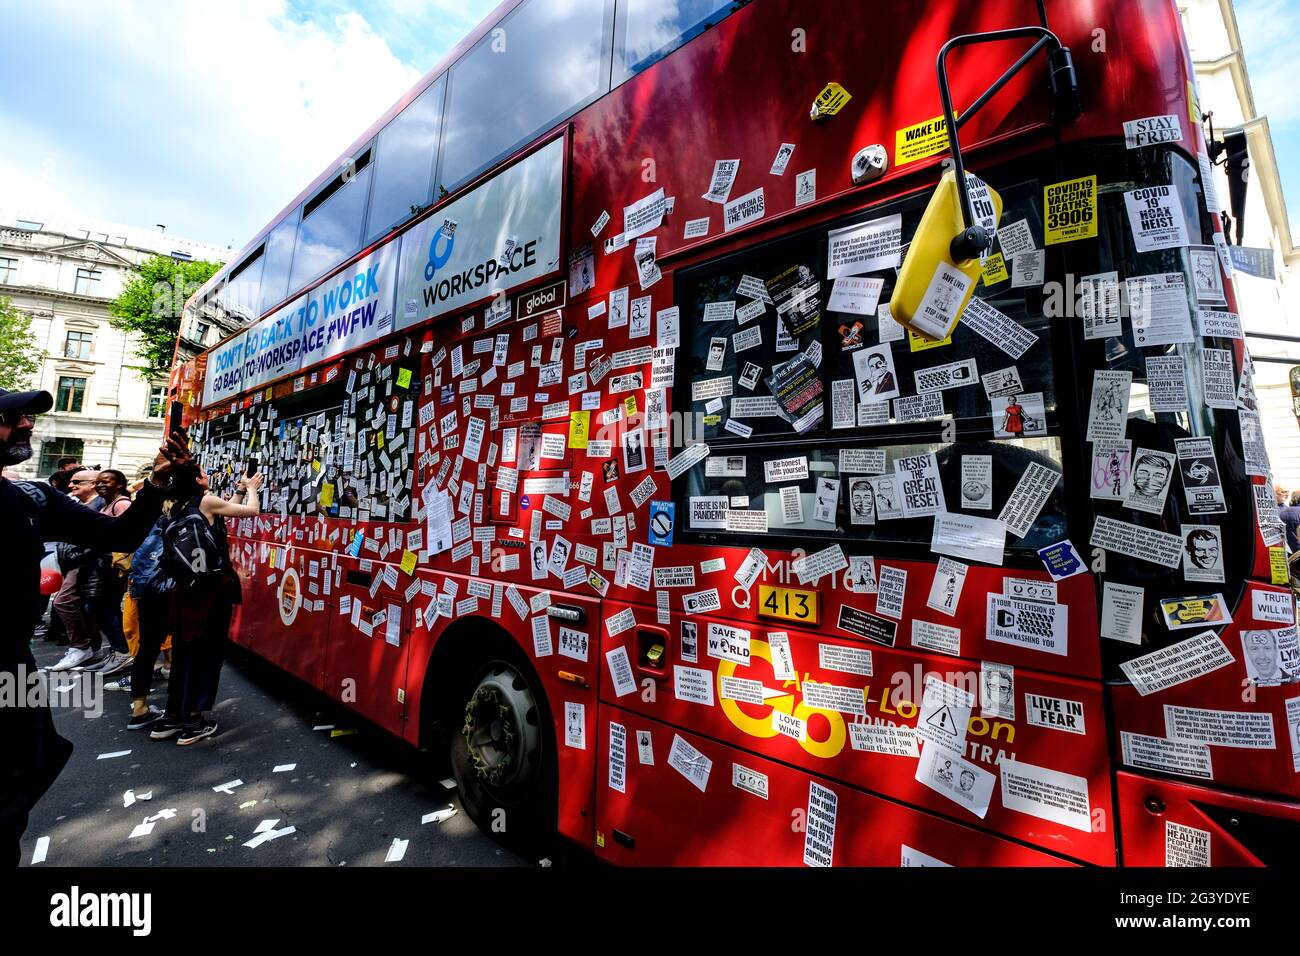 Anti- vax protesters put stickers all over London bus during an Anti-lockdown /anti-vaccination  protest and demonstration in London May 2021 Stock Photo